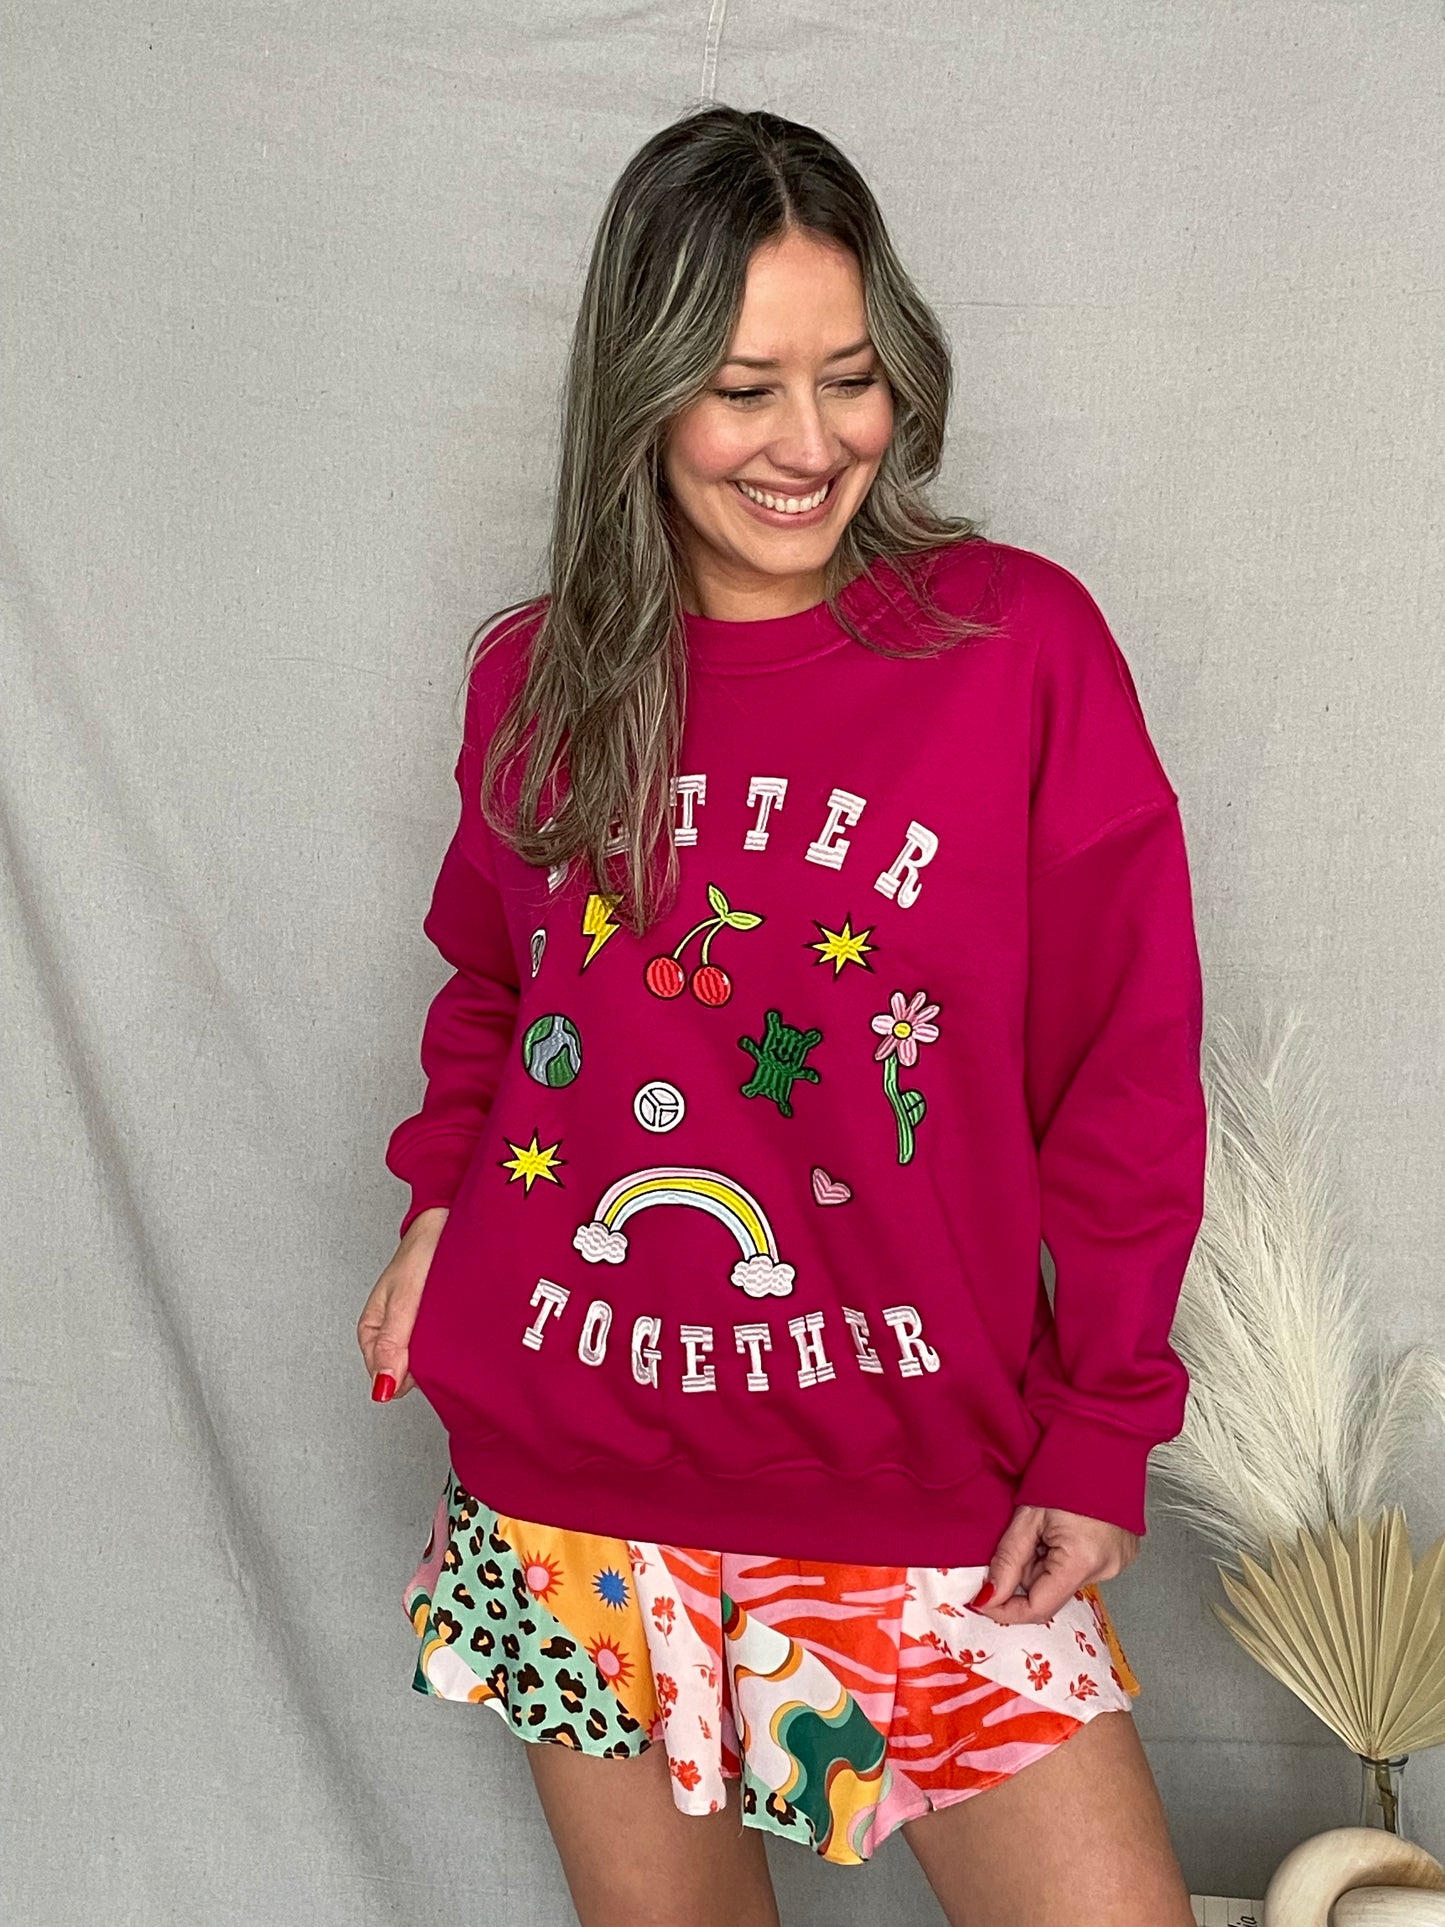 "Better Together" Fuchsia Sweater